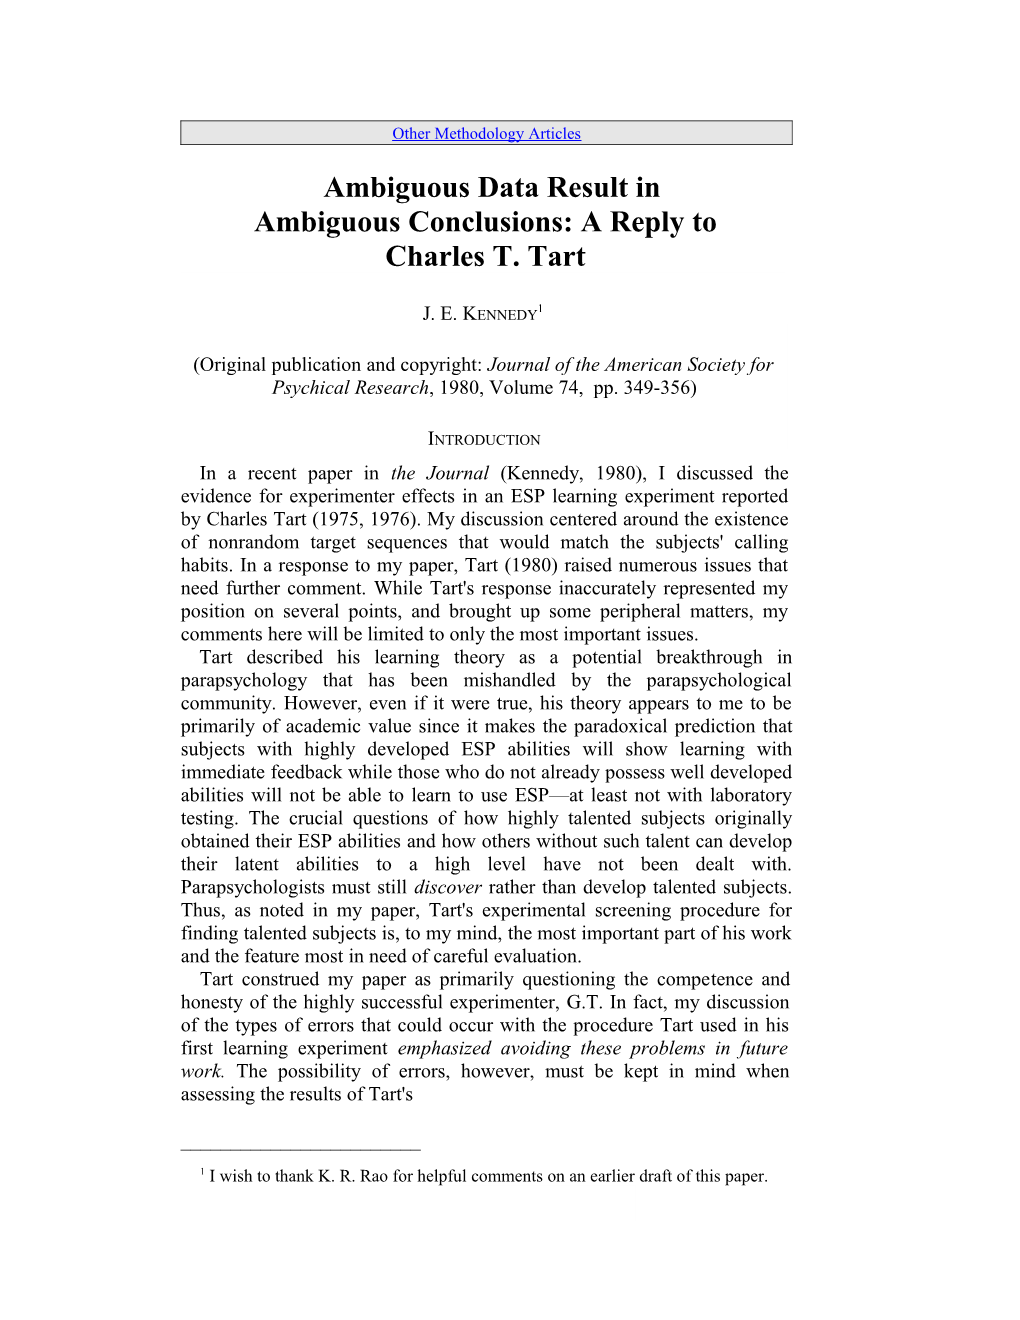 Ambiguous Data Result in Ambiguous Conclusions: a Reply to Charles T